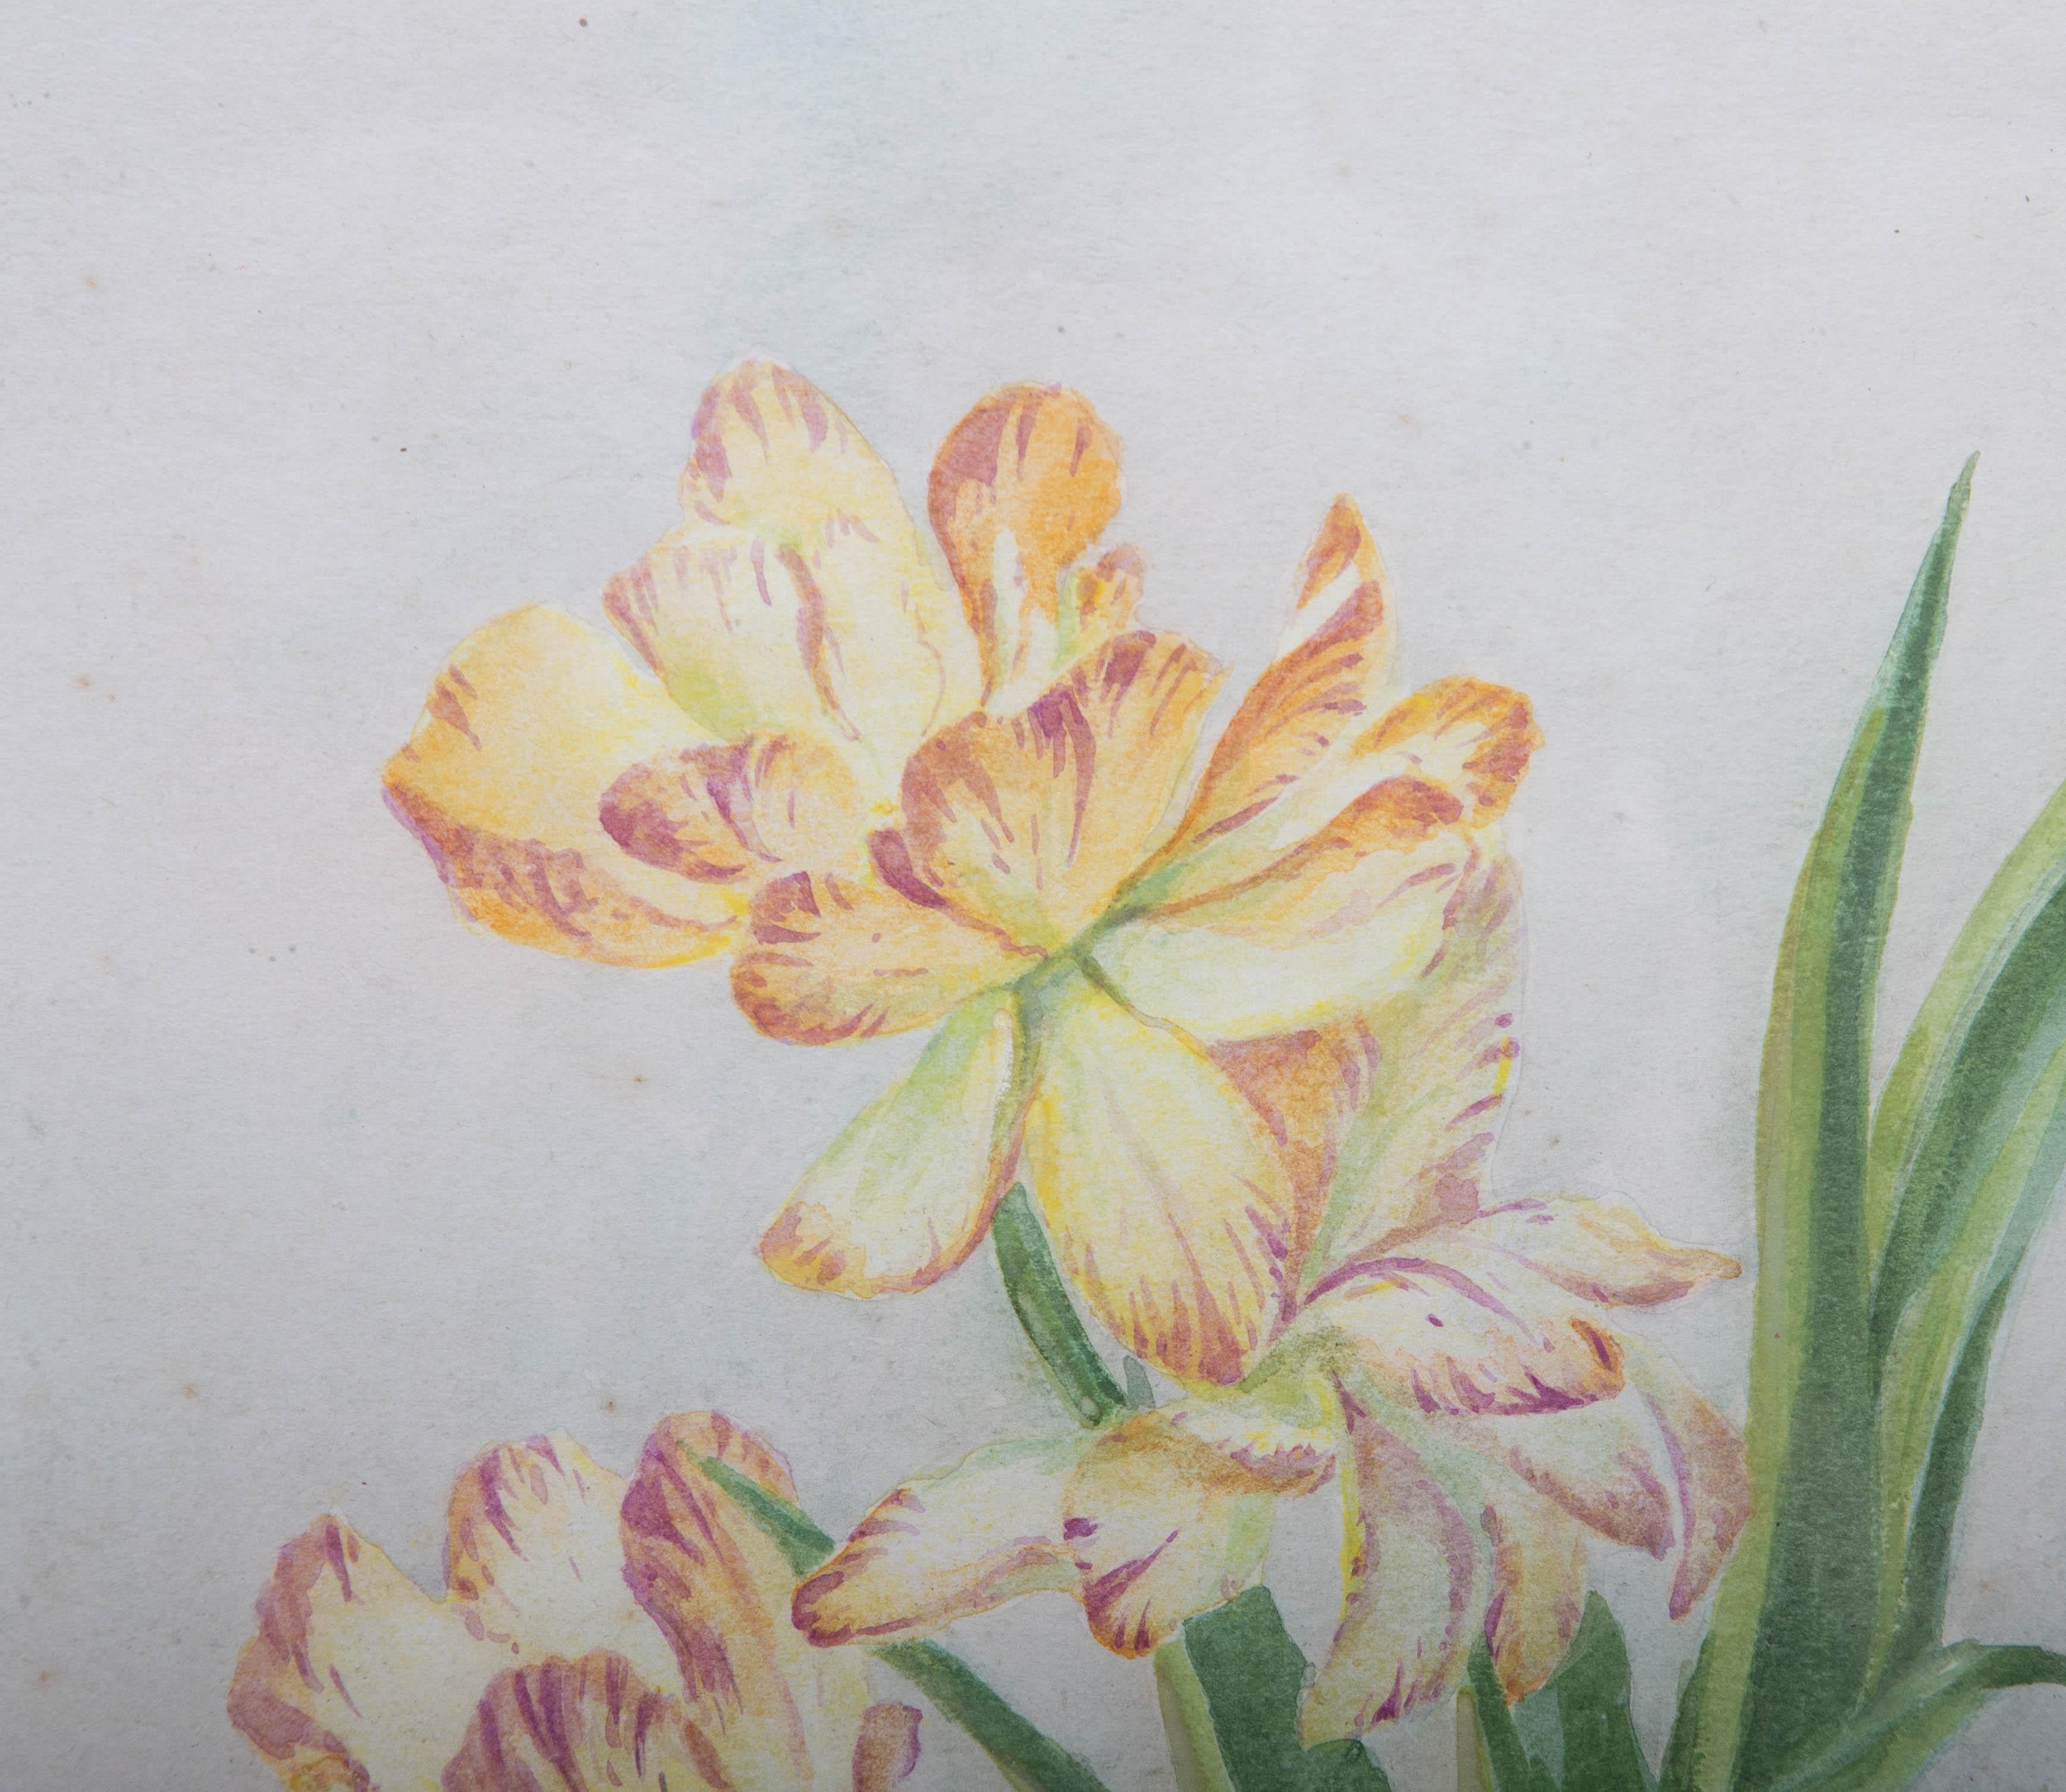 A fine watercolour painting of tiger and white tulips by the authoritative botanical artist Frank Galsworthy (1863-1959). Presented glazed in an oak frame with a white painted inner edge. Signed and dated to the lower-right corner. On watercolour